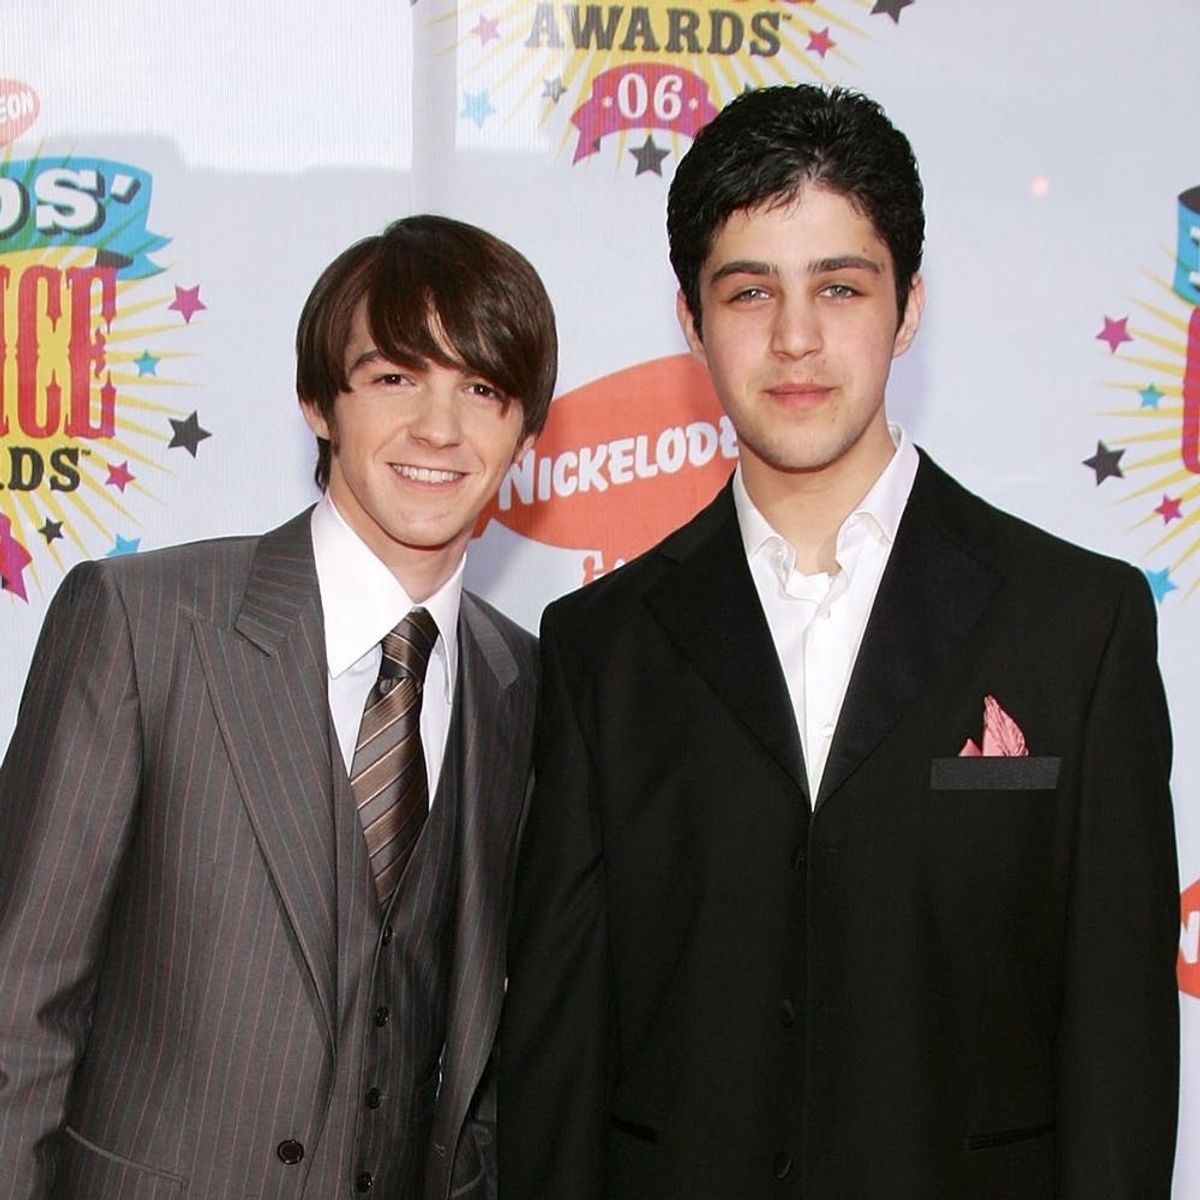 Drake Bell and Josh Peck Squashed Their Beef at the MTV VMAs and Fans Are Emotional